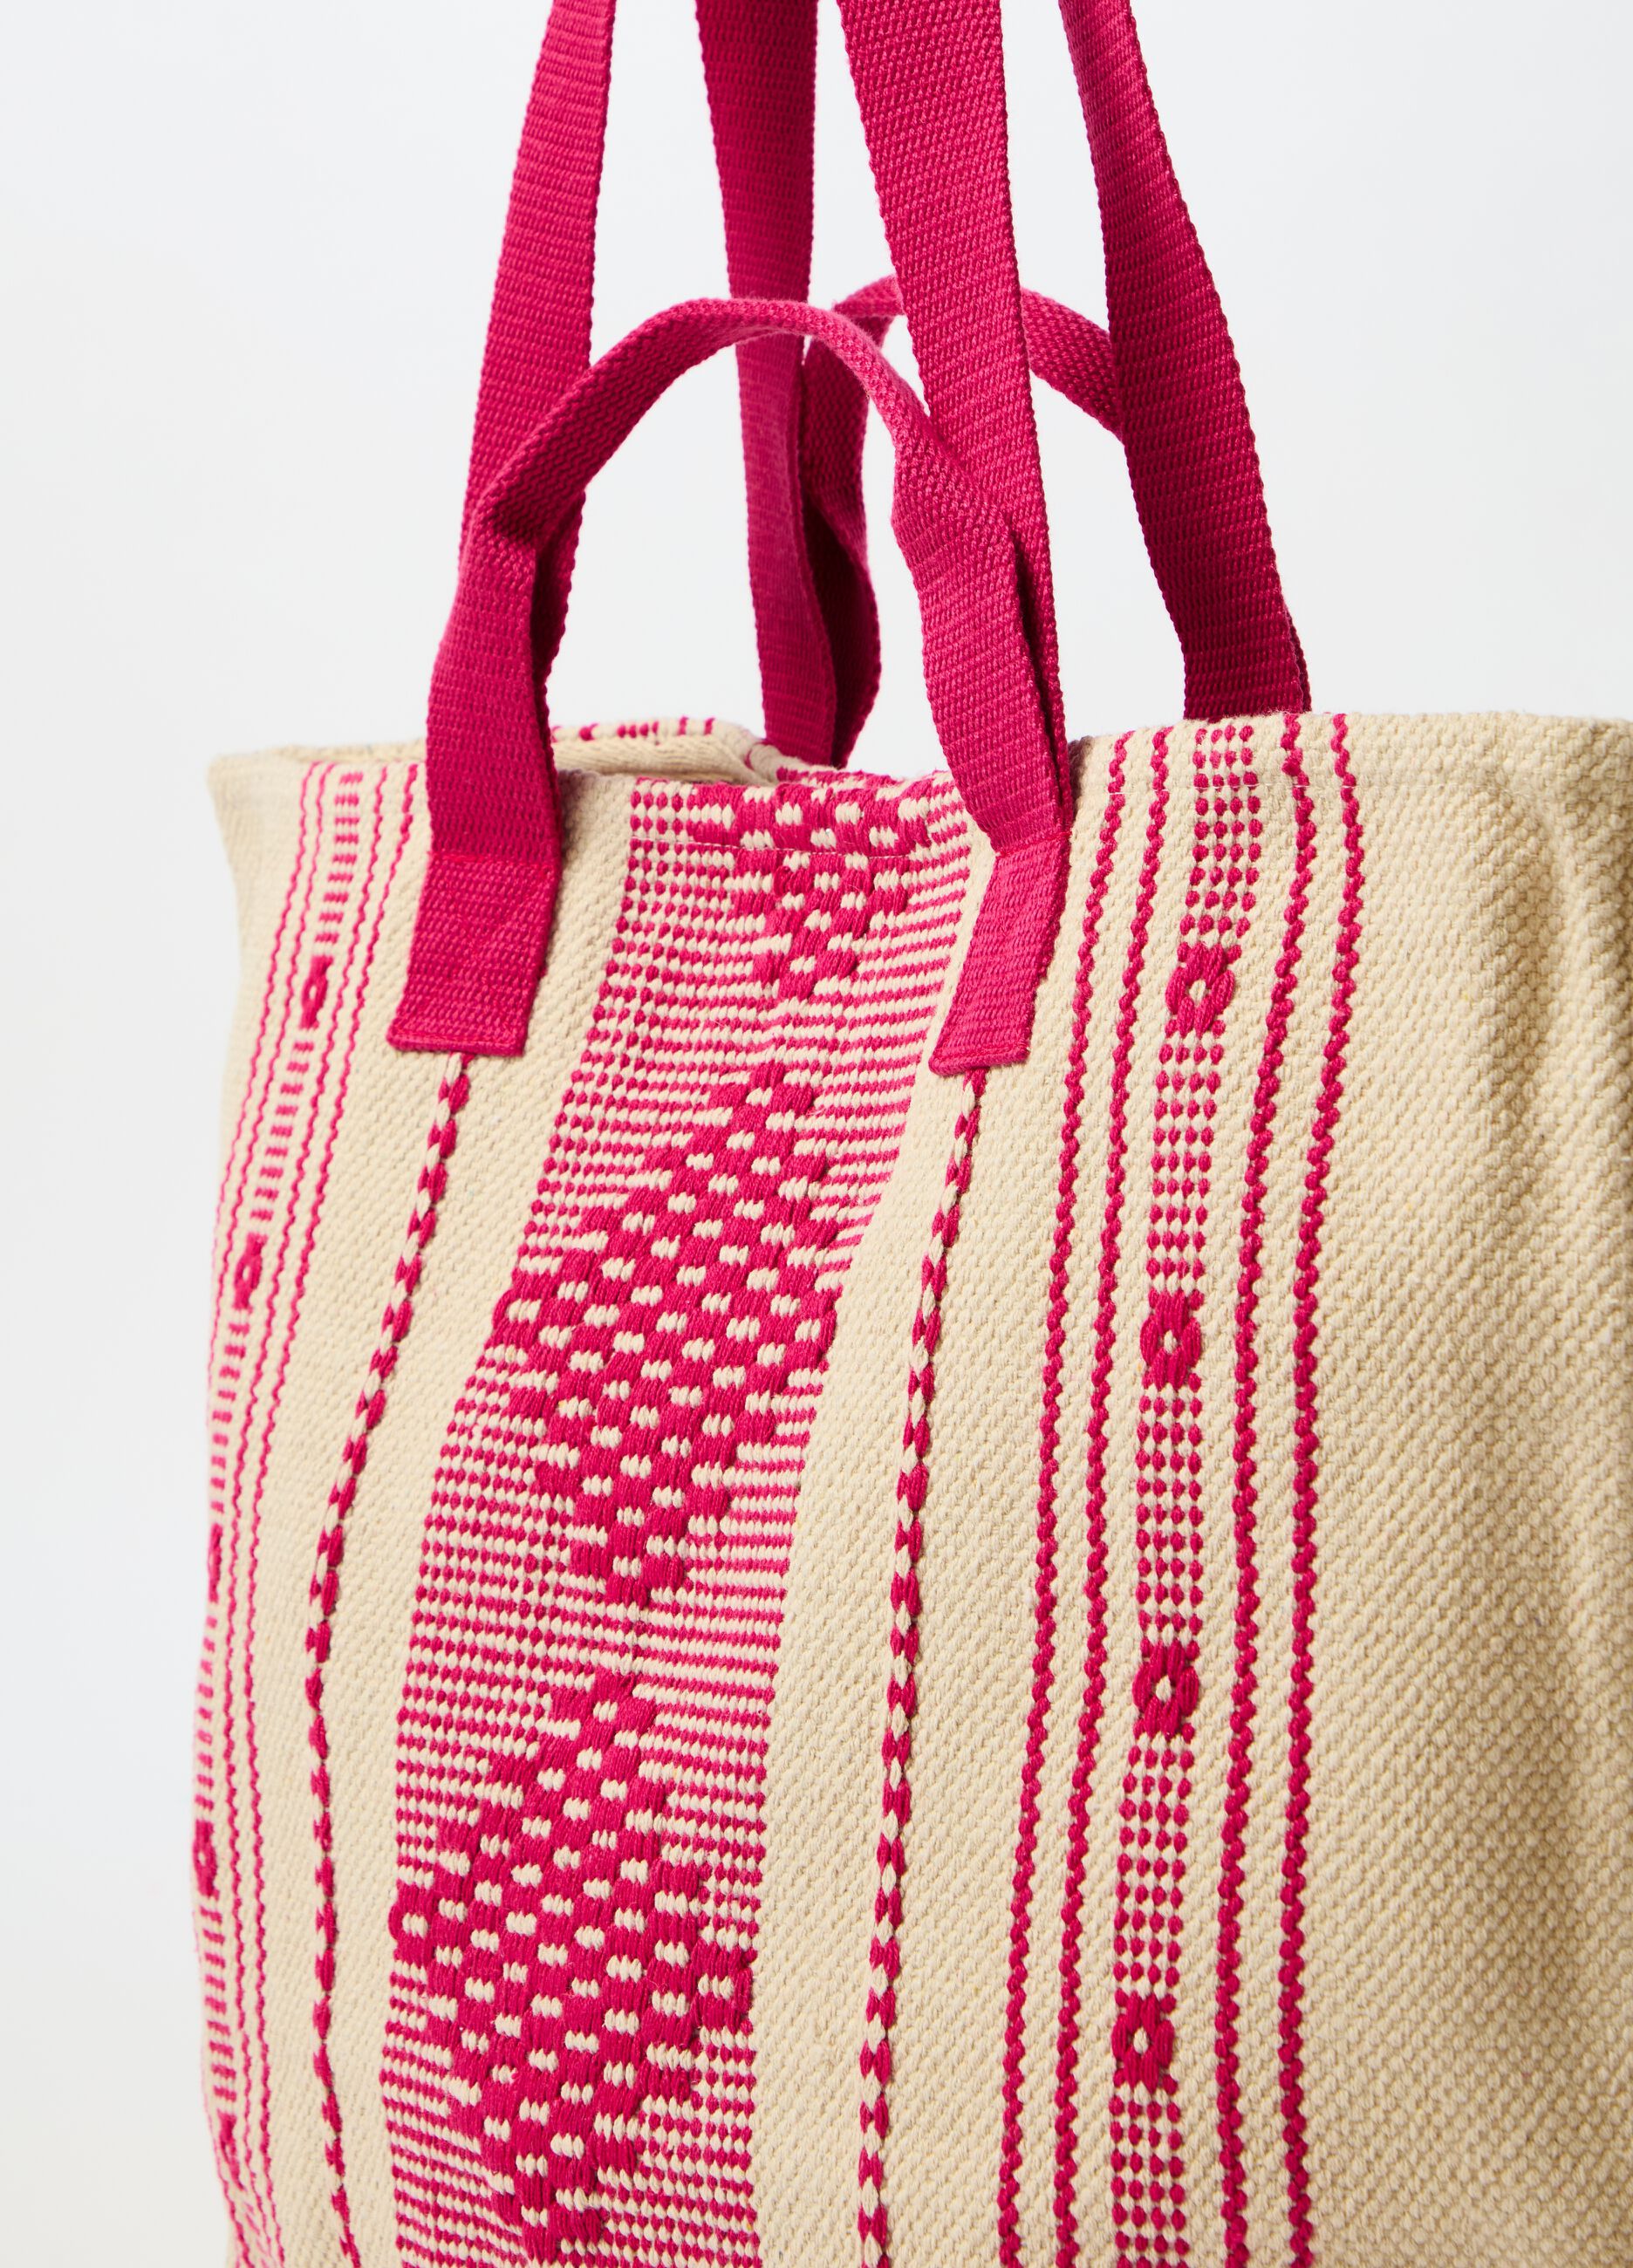 Canvas bag with ethnic motif